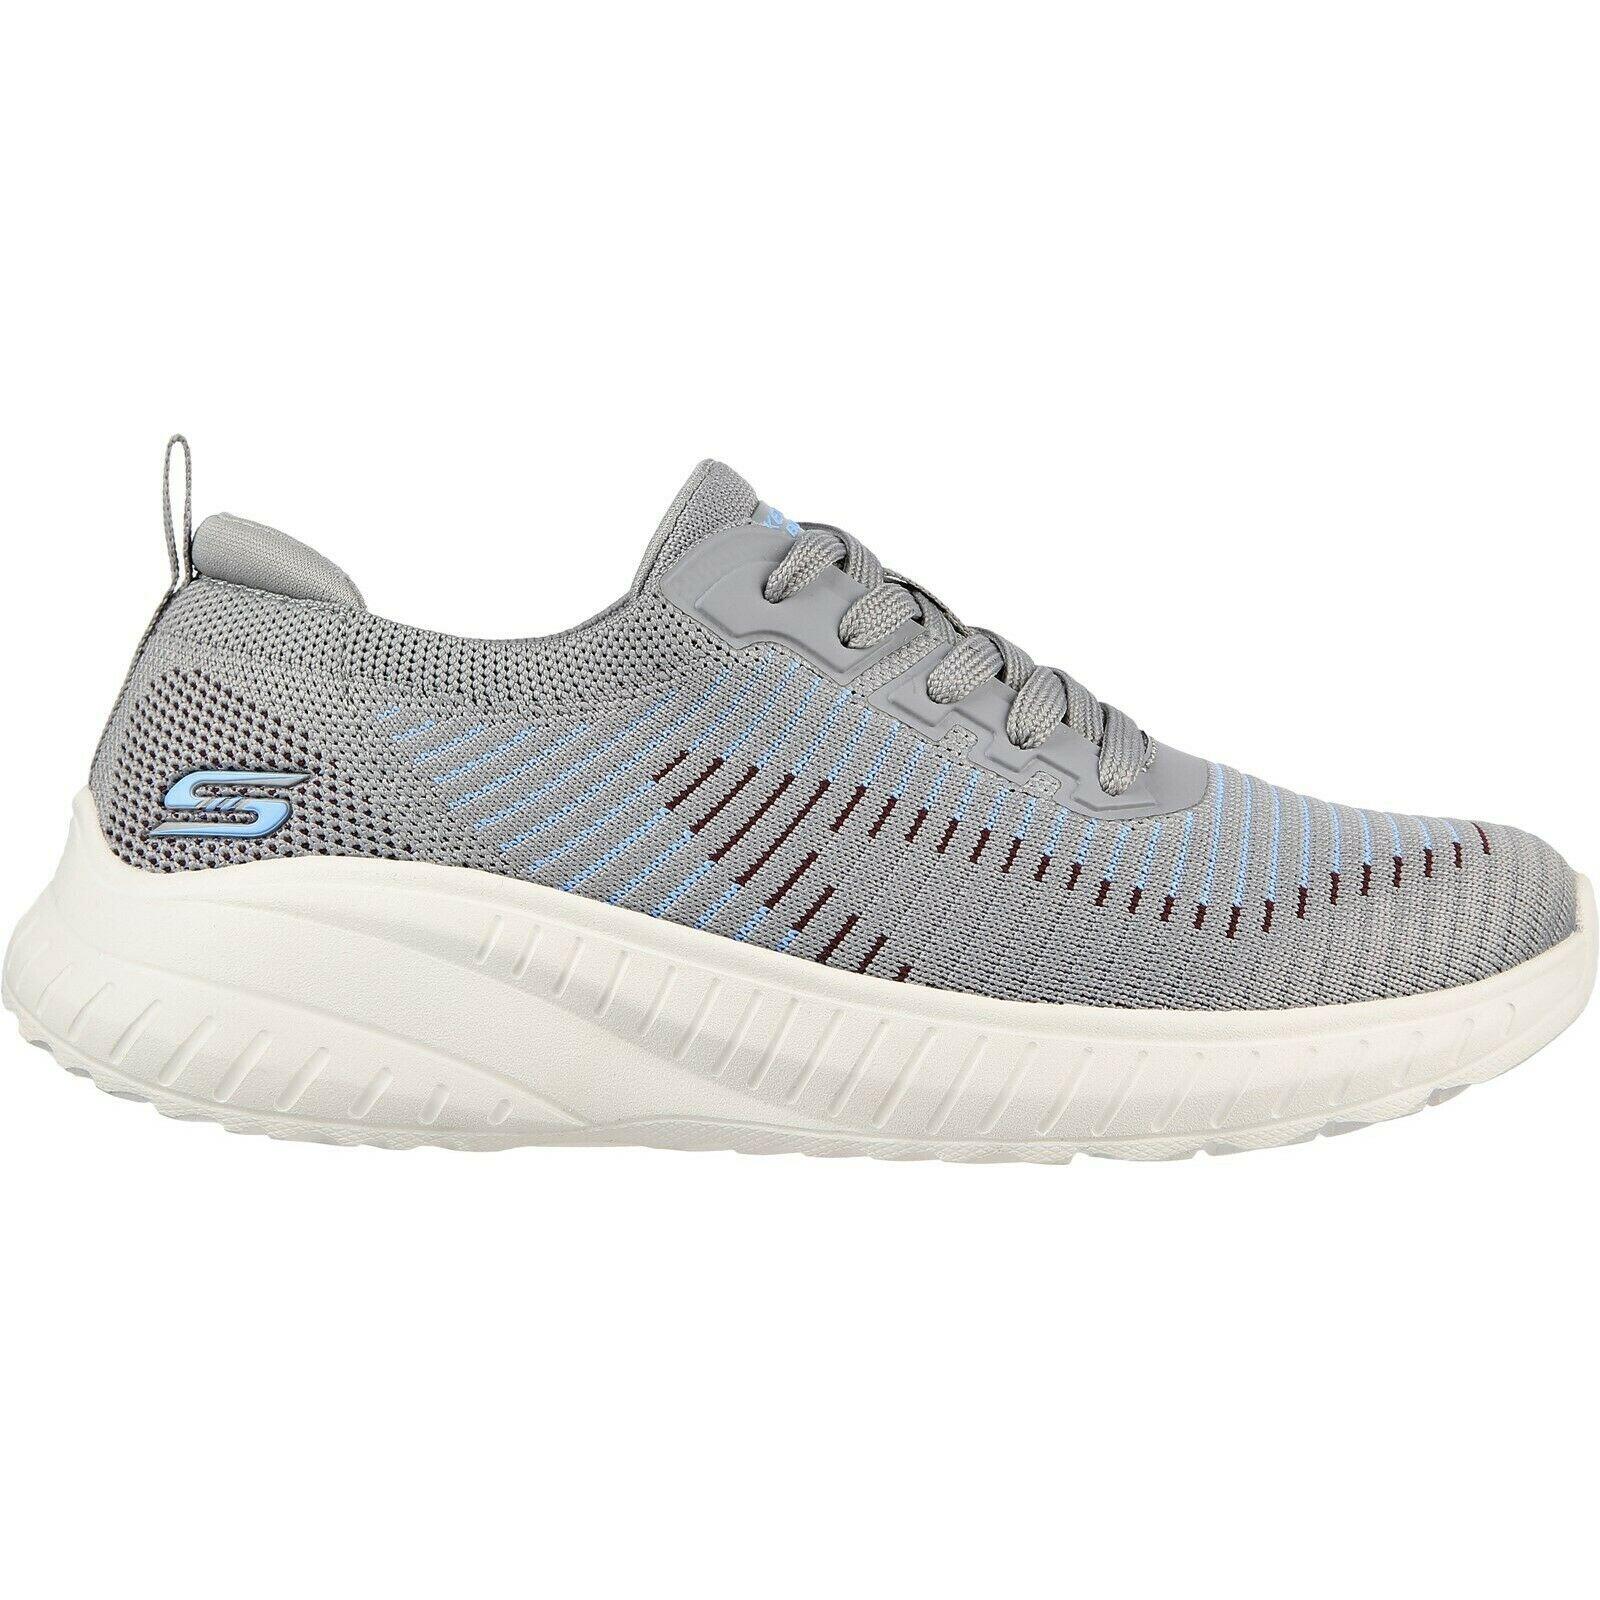 Womens/Ladies Bobs Squad Chaos Renegade Parade Trainers (Grey) 4/5